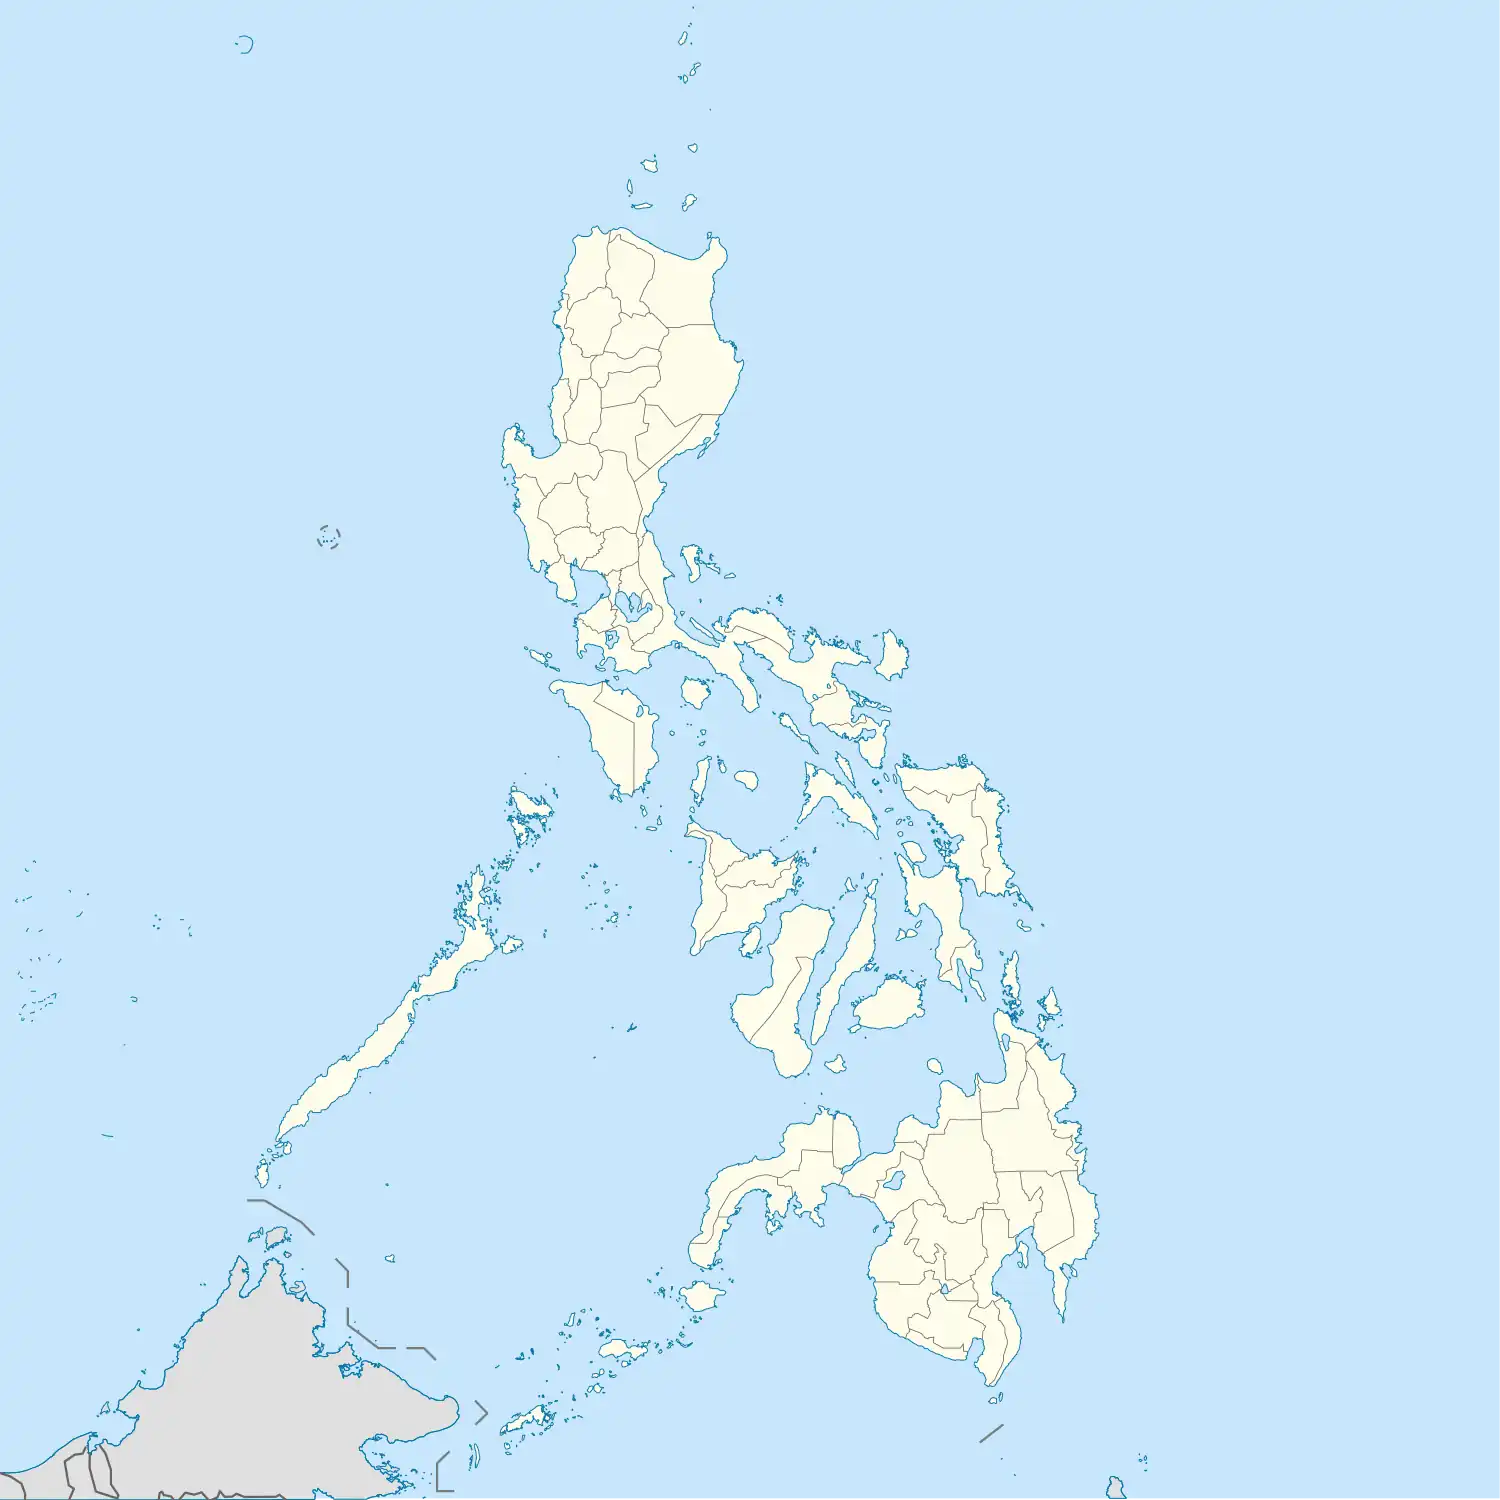 San Pablo is located in Philippines